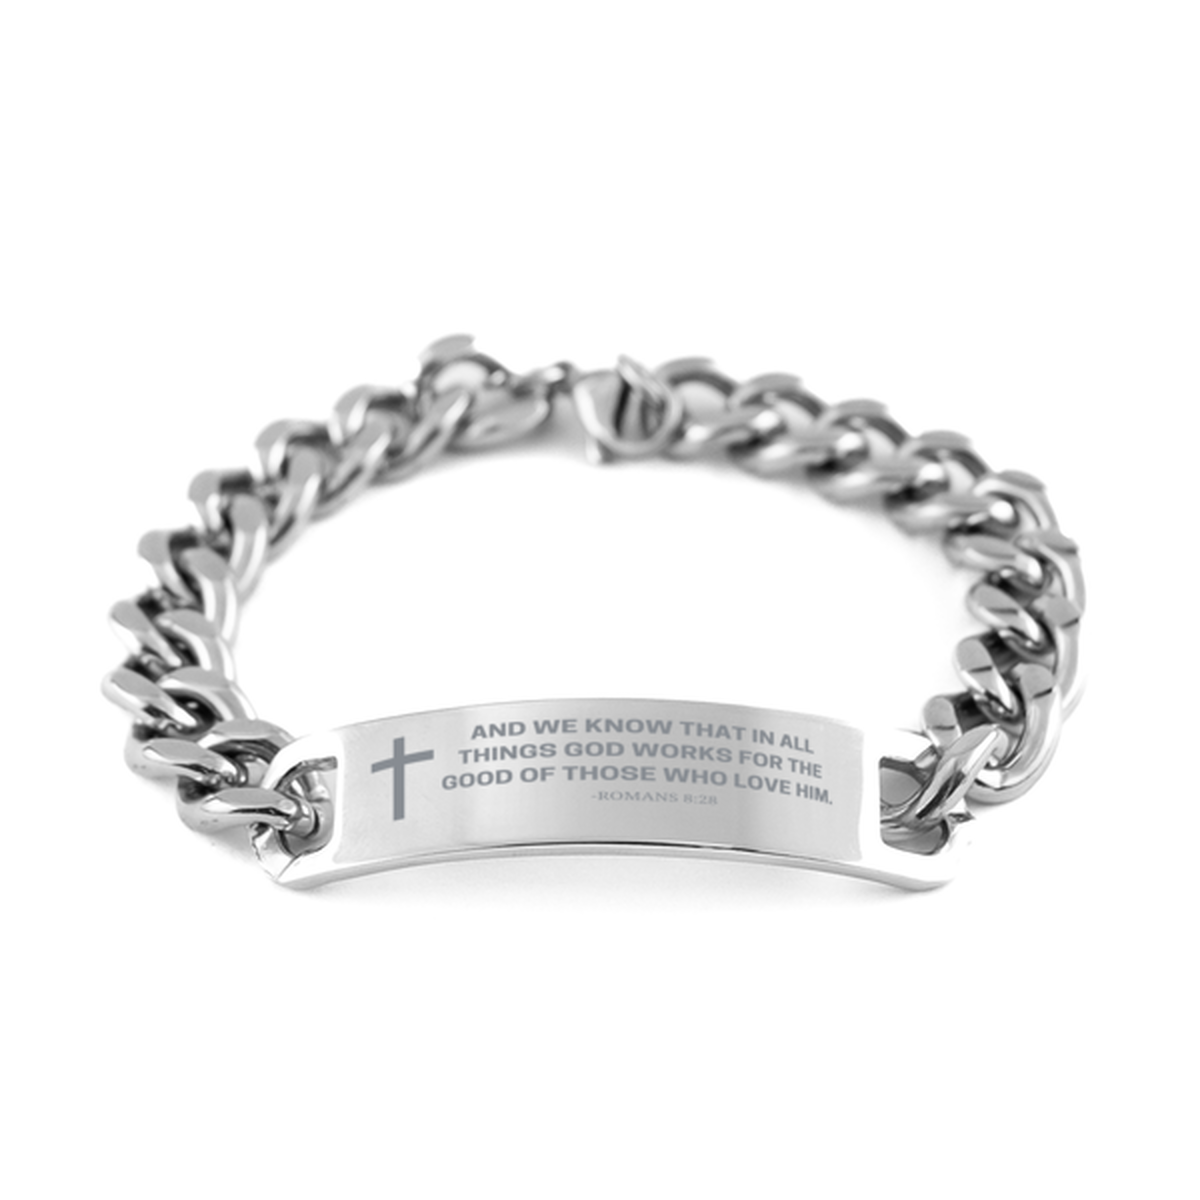 Baptism Gifts For Teenage Boys Girls, Christian Bible Verse Cuban Chain Bracelet, And we know that in all things, Catholic Confirmation Gifts for Son, Godson, Grandson, Nephew